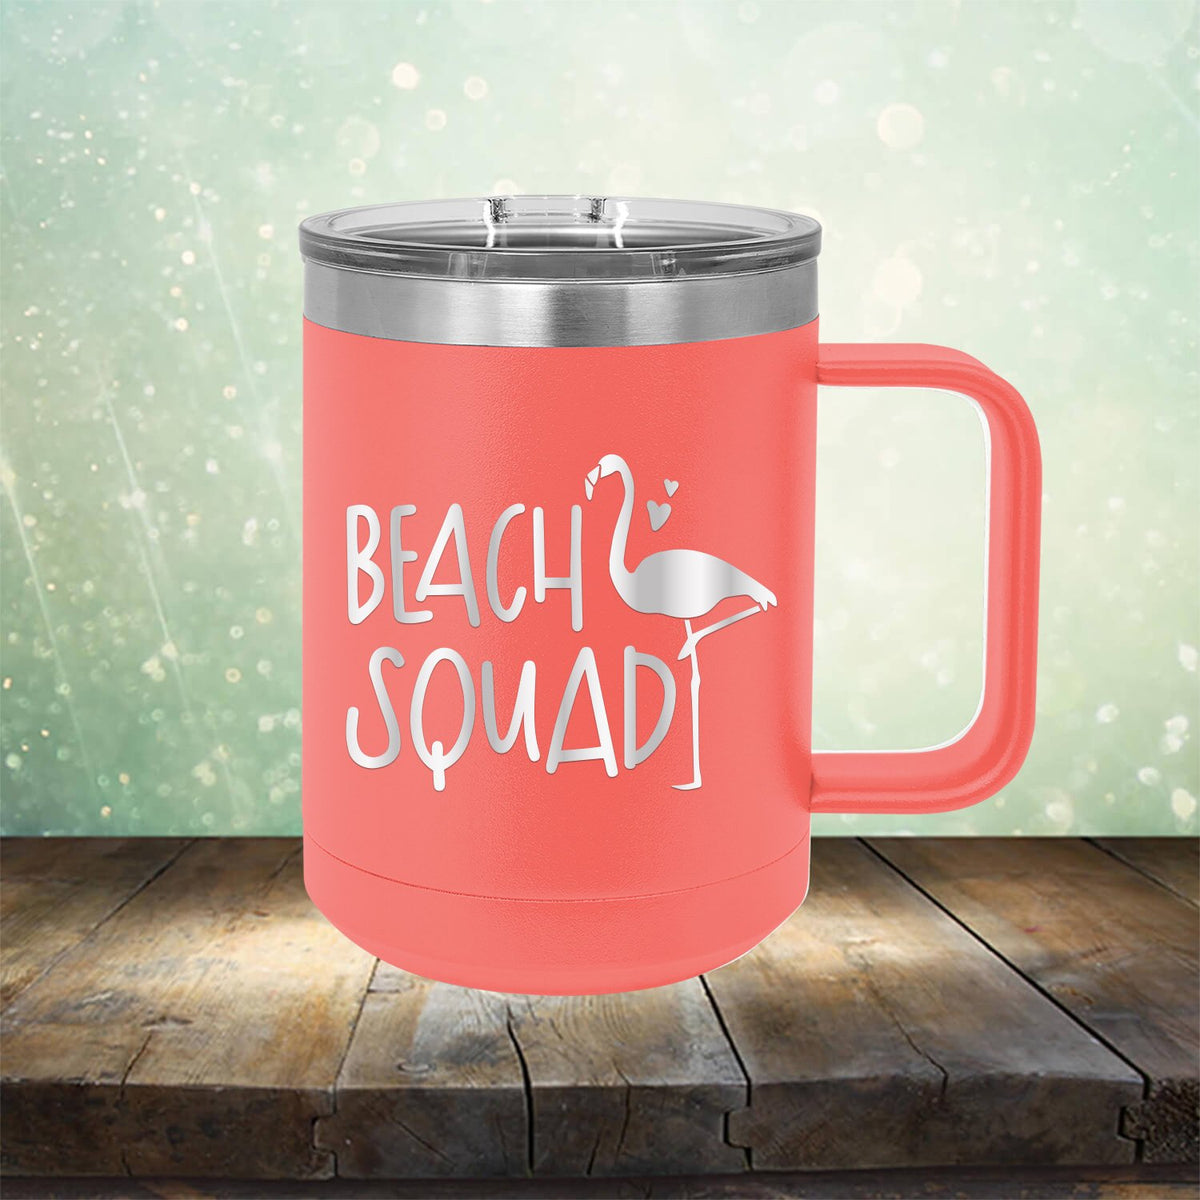 Beach Squad with Swan - Laser Etched Tumbler Mug